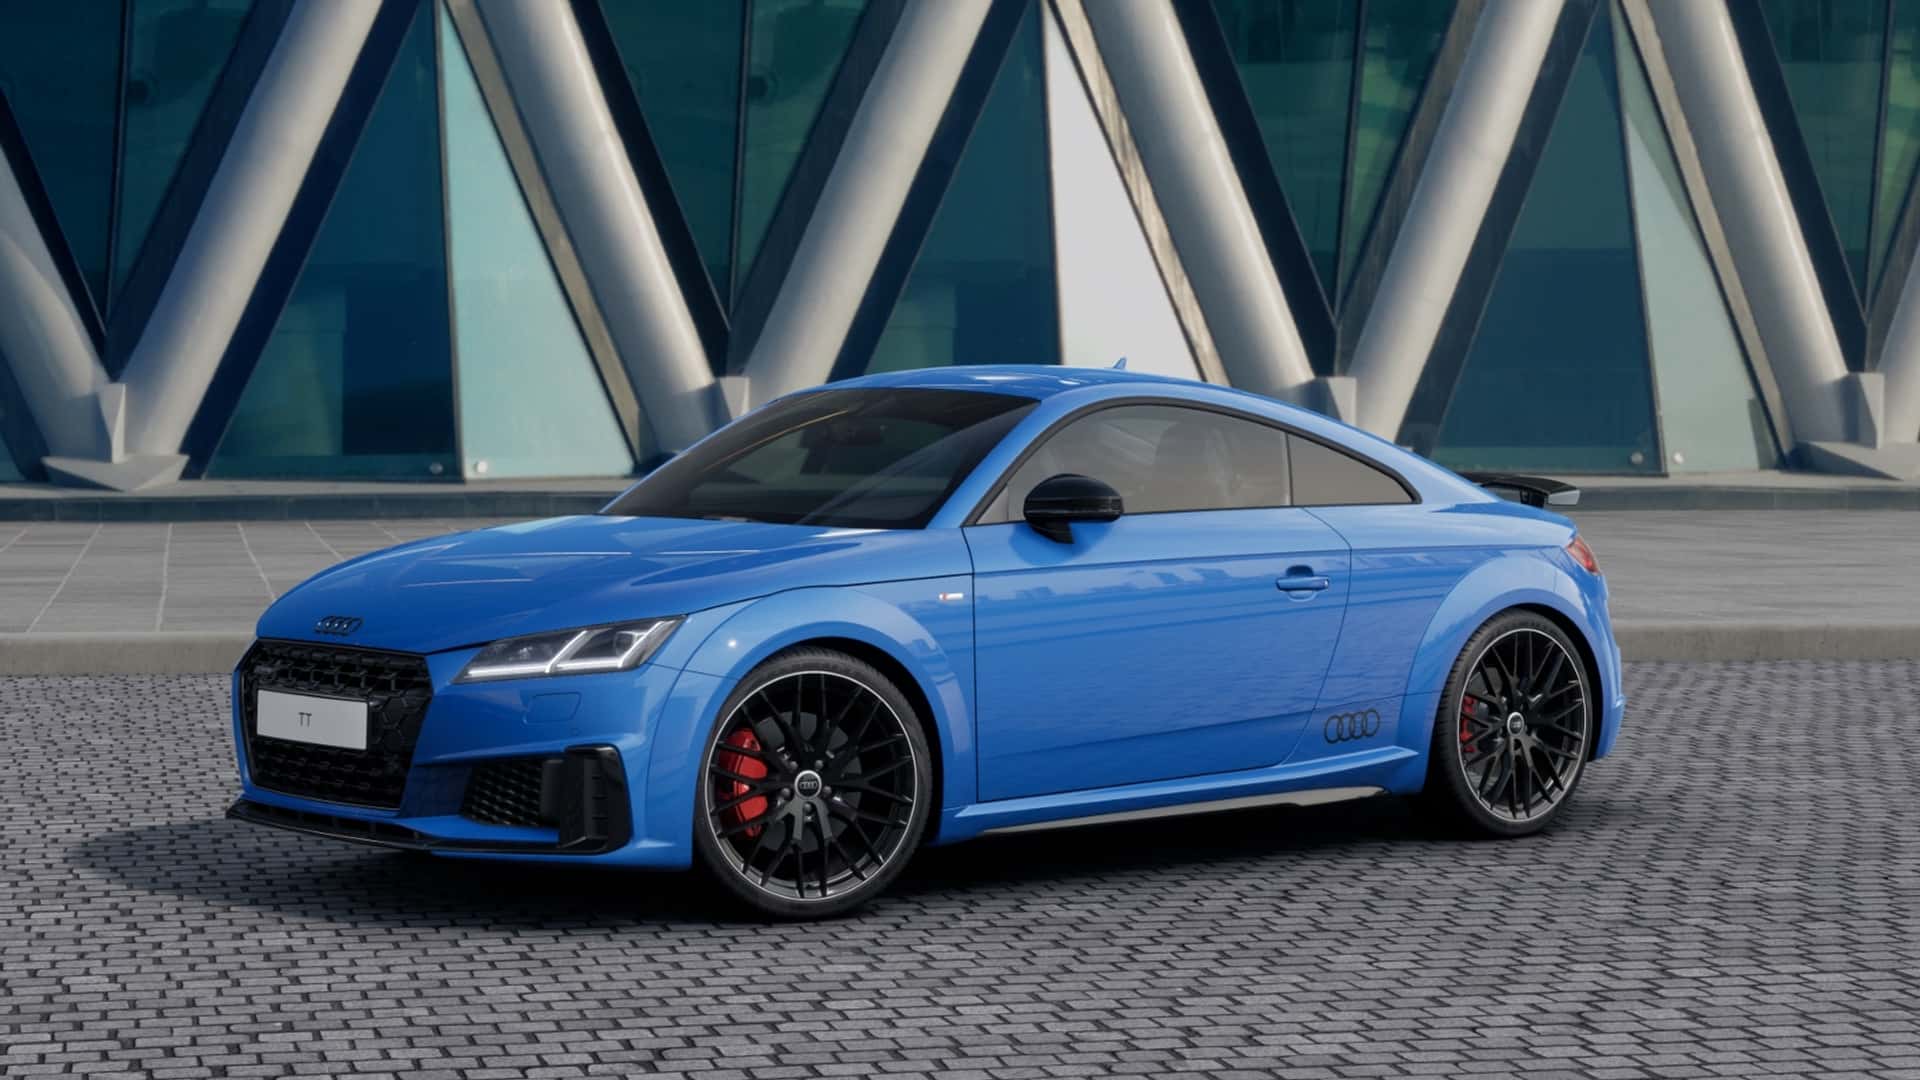 limited edition audi tt launched: a tribute to 25-years of history